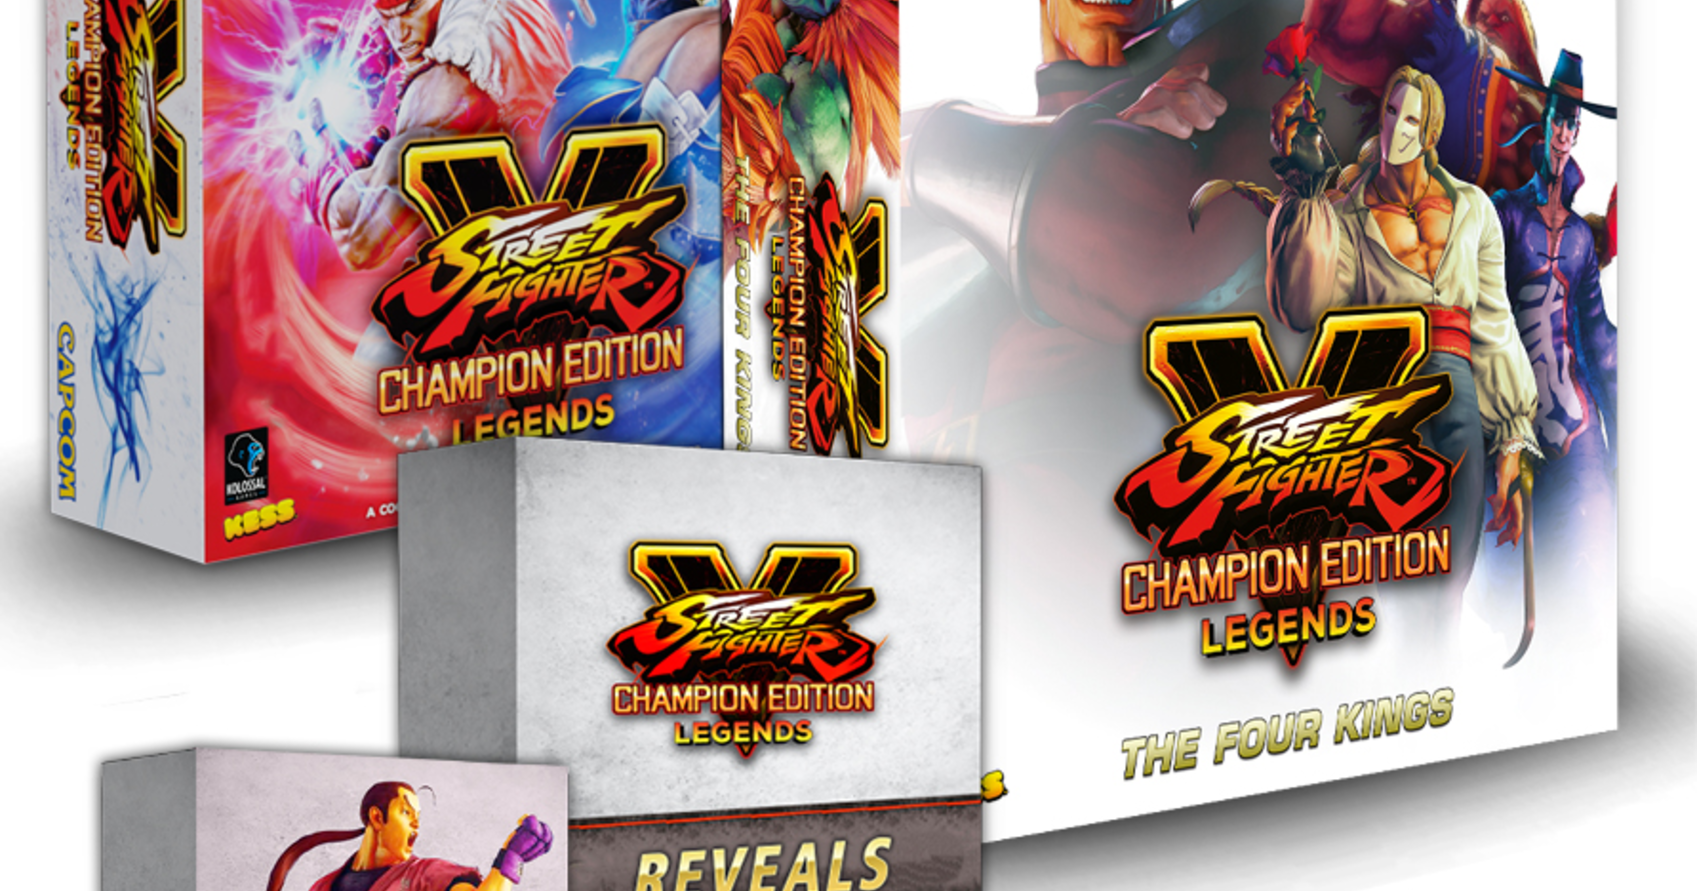 CAPCOM - Street Fighter V Champion Edition All Characters Pack